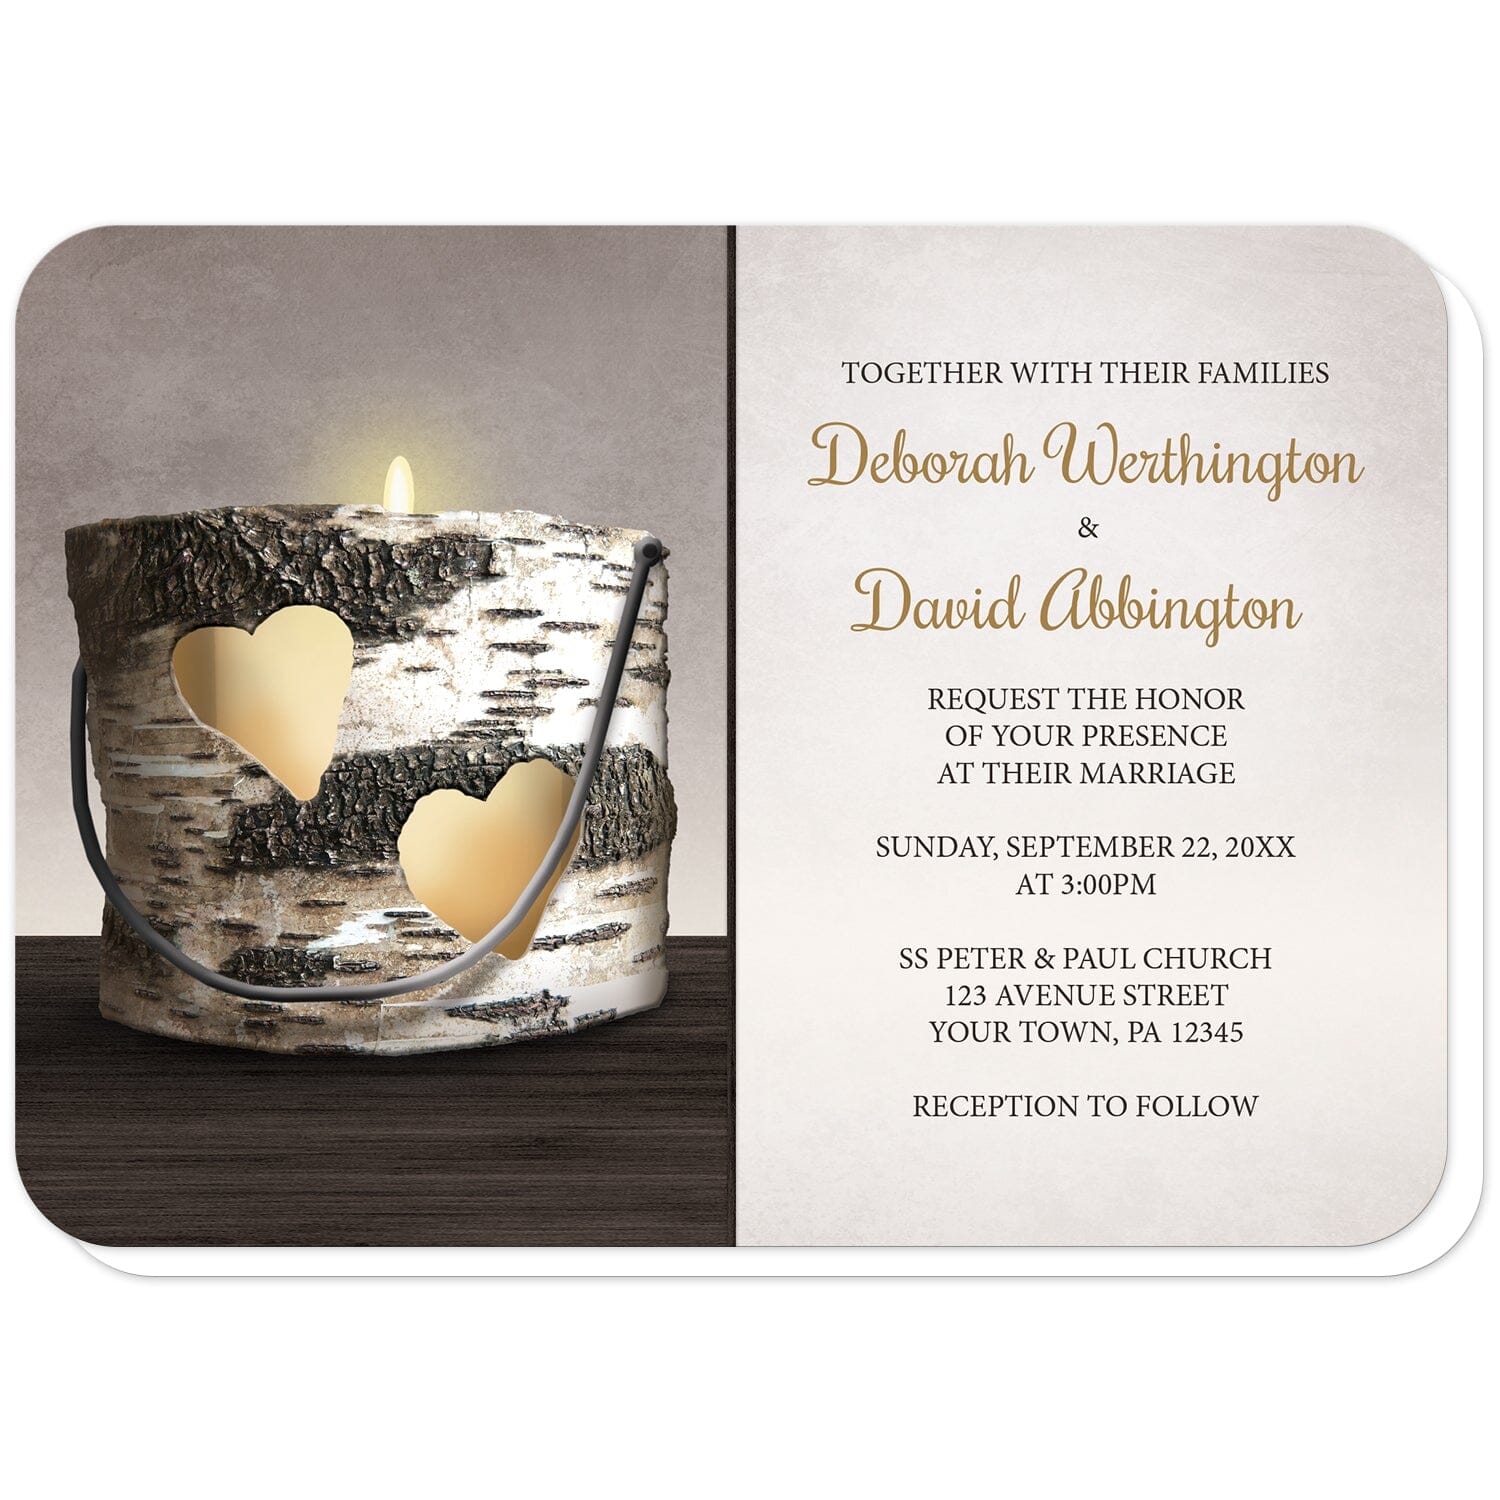 Rustic Birch Candle Hearts Wedding Invitations (with rounded corners) at Artistically Invited. Southern-inspired rustic birch candle hearts wedding invitations with an illustration of a white birch bark candle holder, with two hearts cut from it revealing a candle lit inside of it, on a dark wood grain tabletop over a mocha beige background. Your personalized marriage celebration details are custom printed in gold and brown over a lighter beige background to the right of the birch candle.